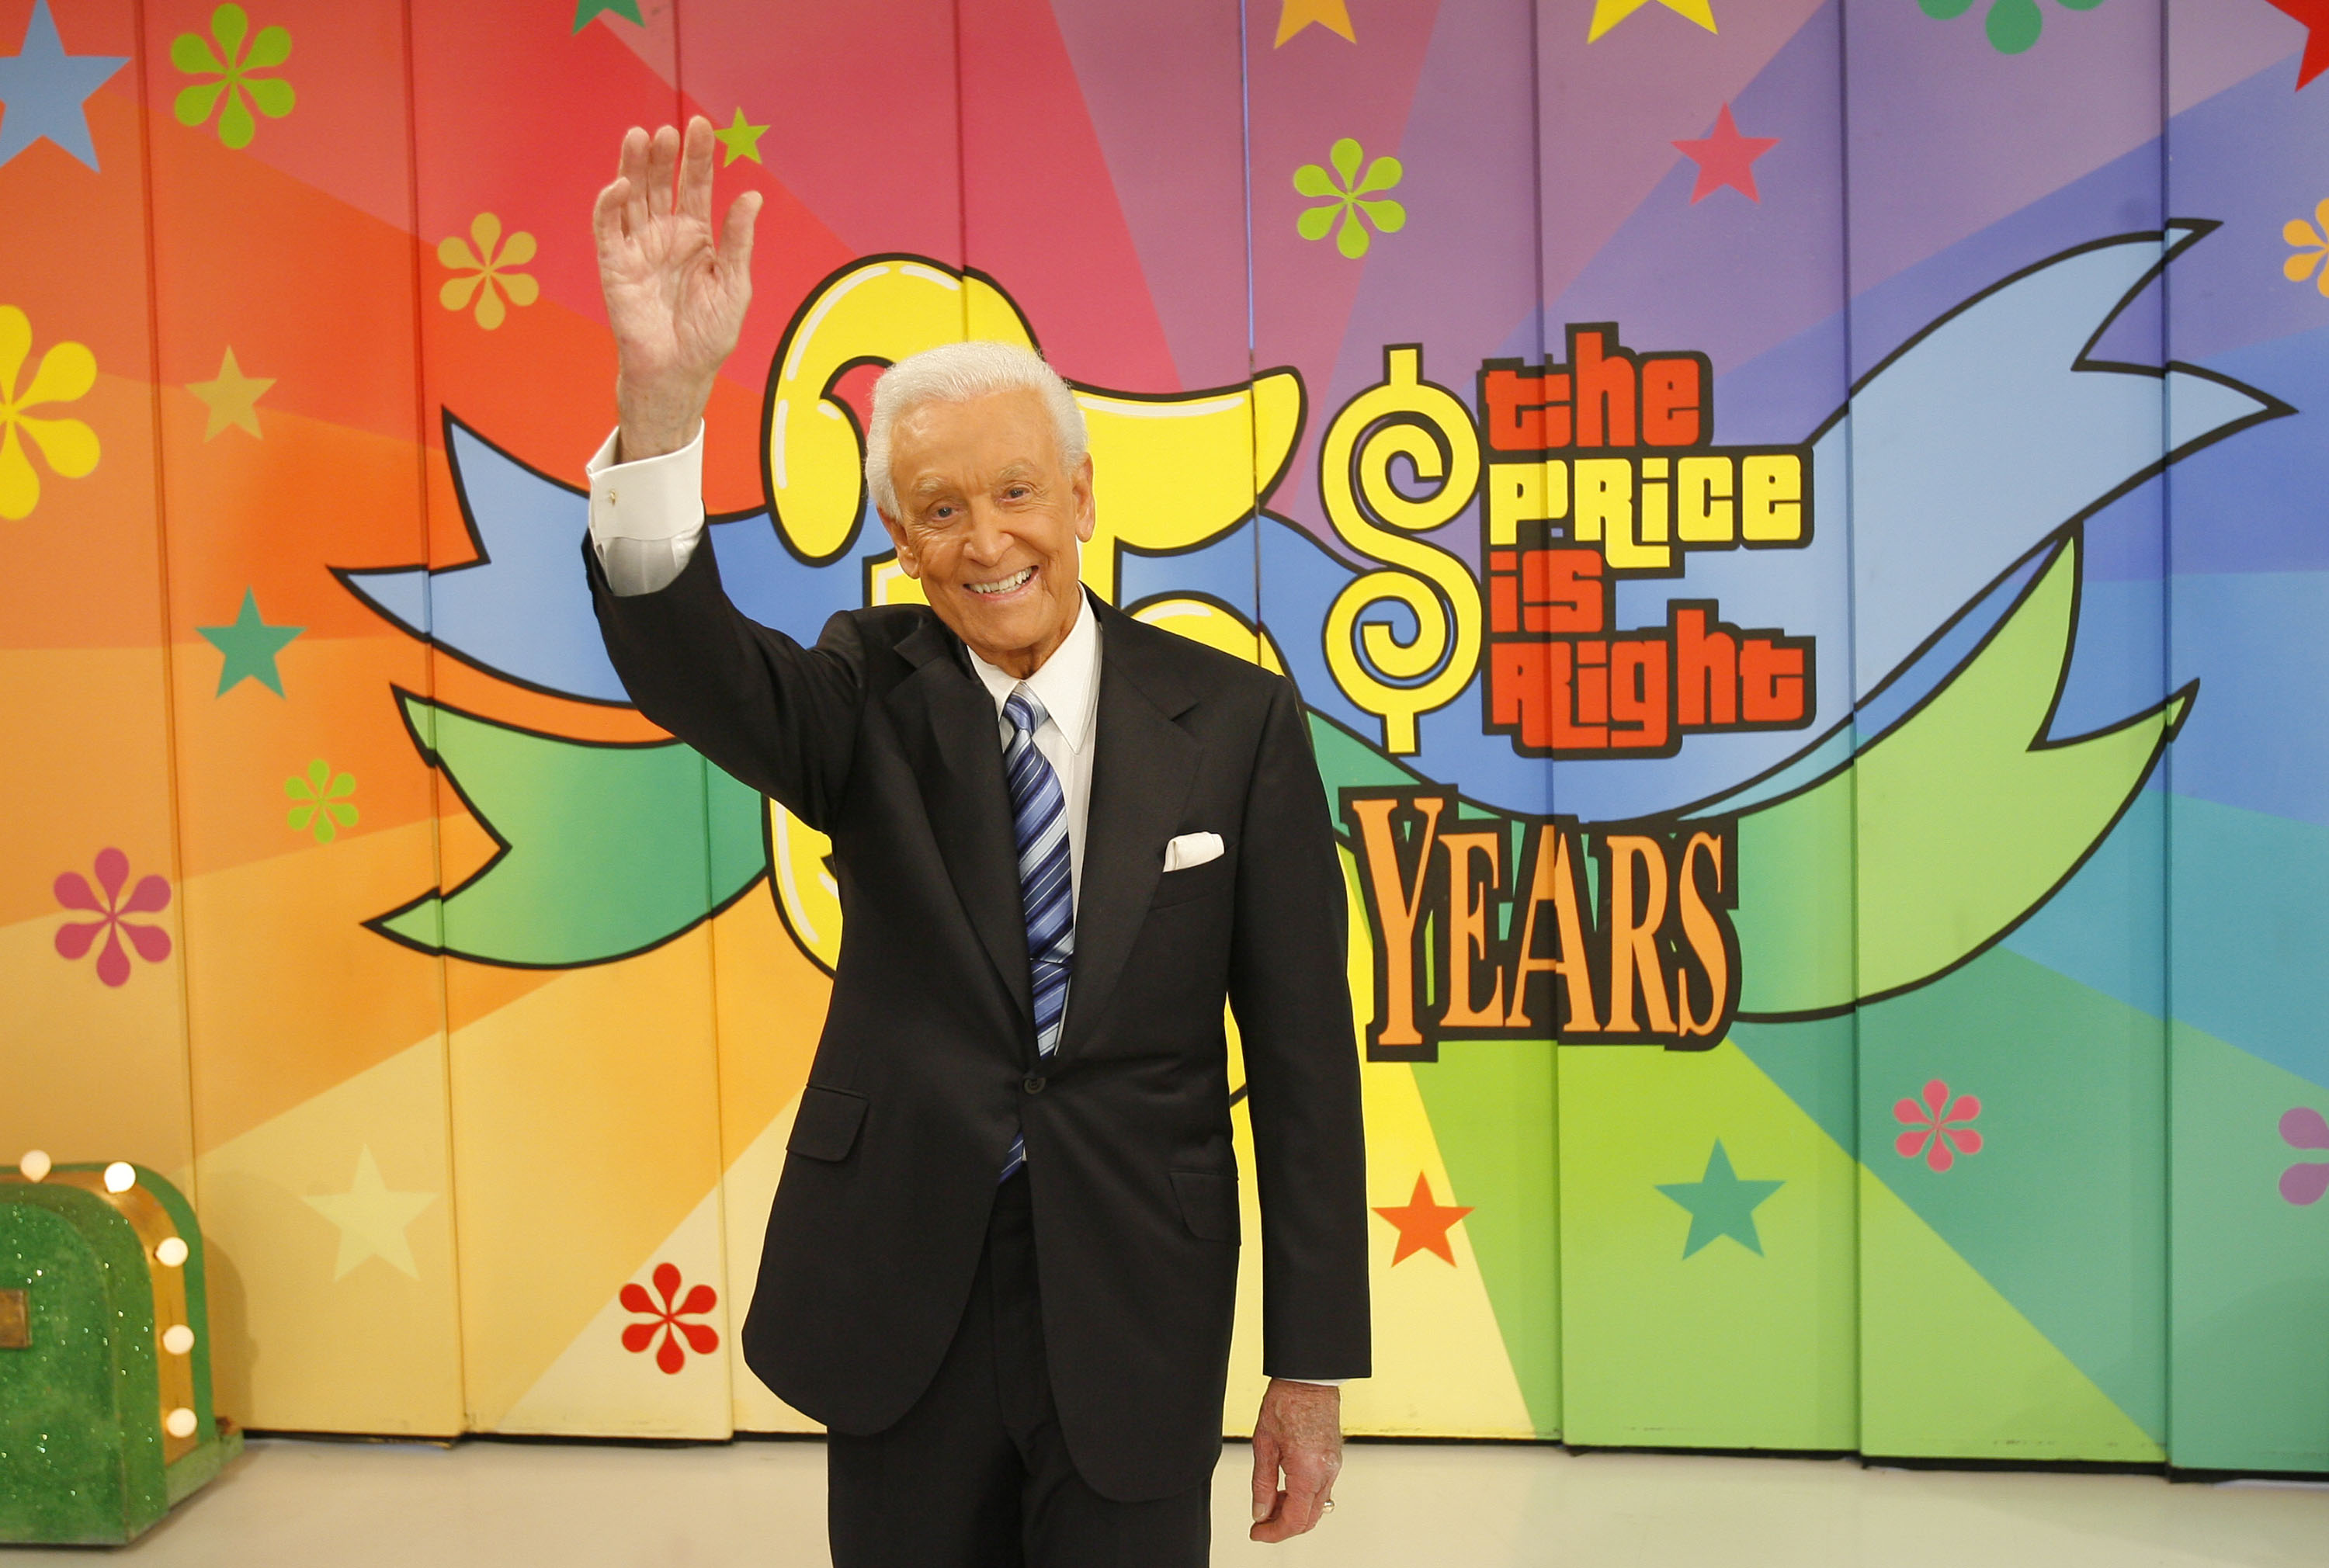 Fans claimed Drew picked up the annoying habit from former Price is Right host bob Barker